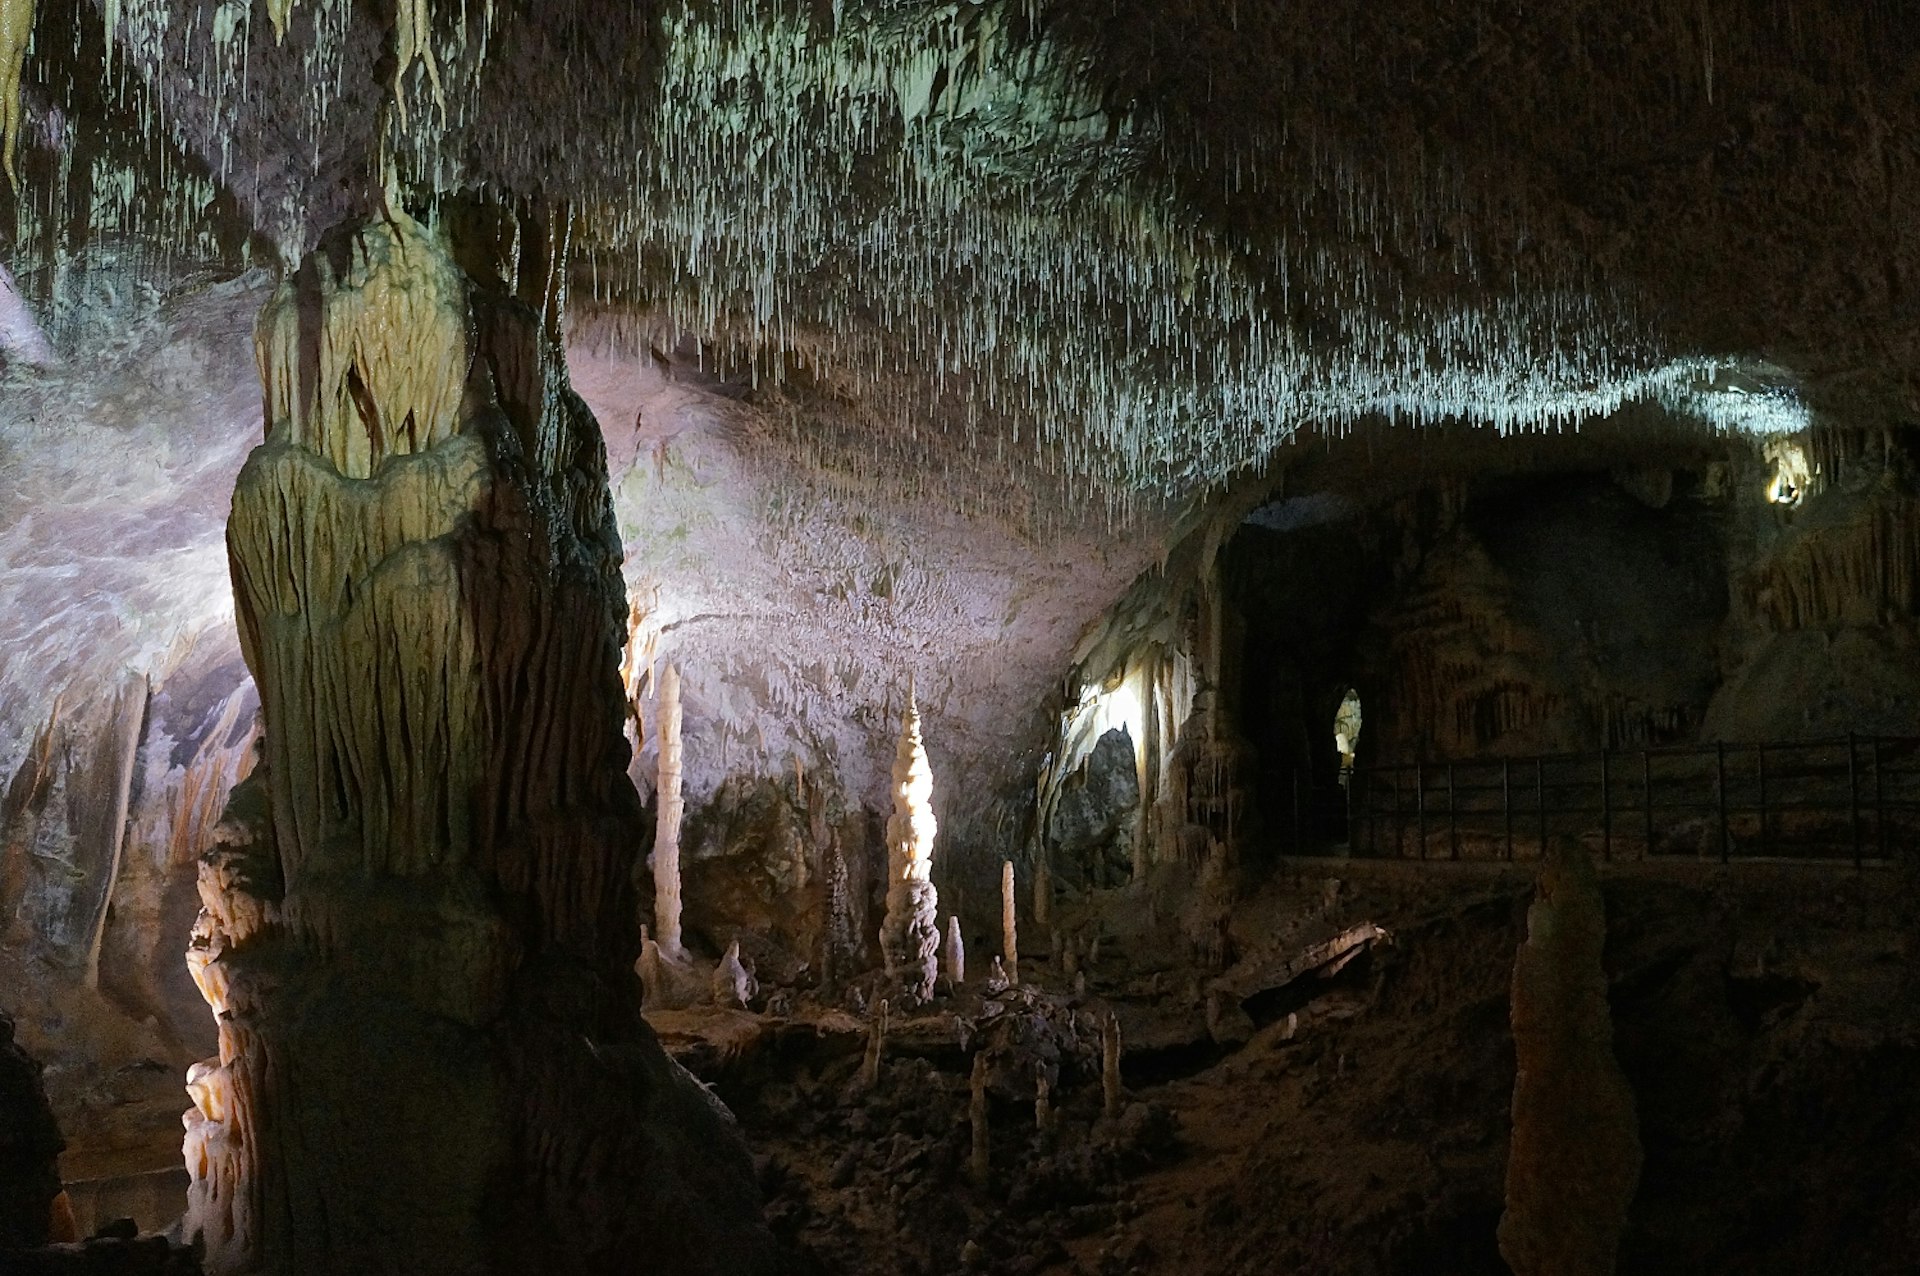 Rock formations including stalagmites and spaghetti stalactites in a cave